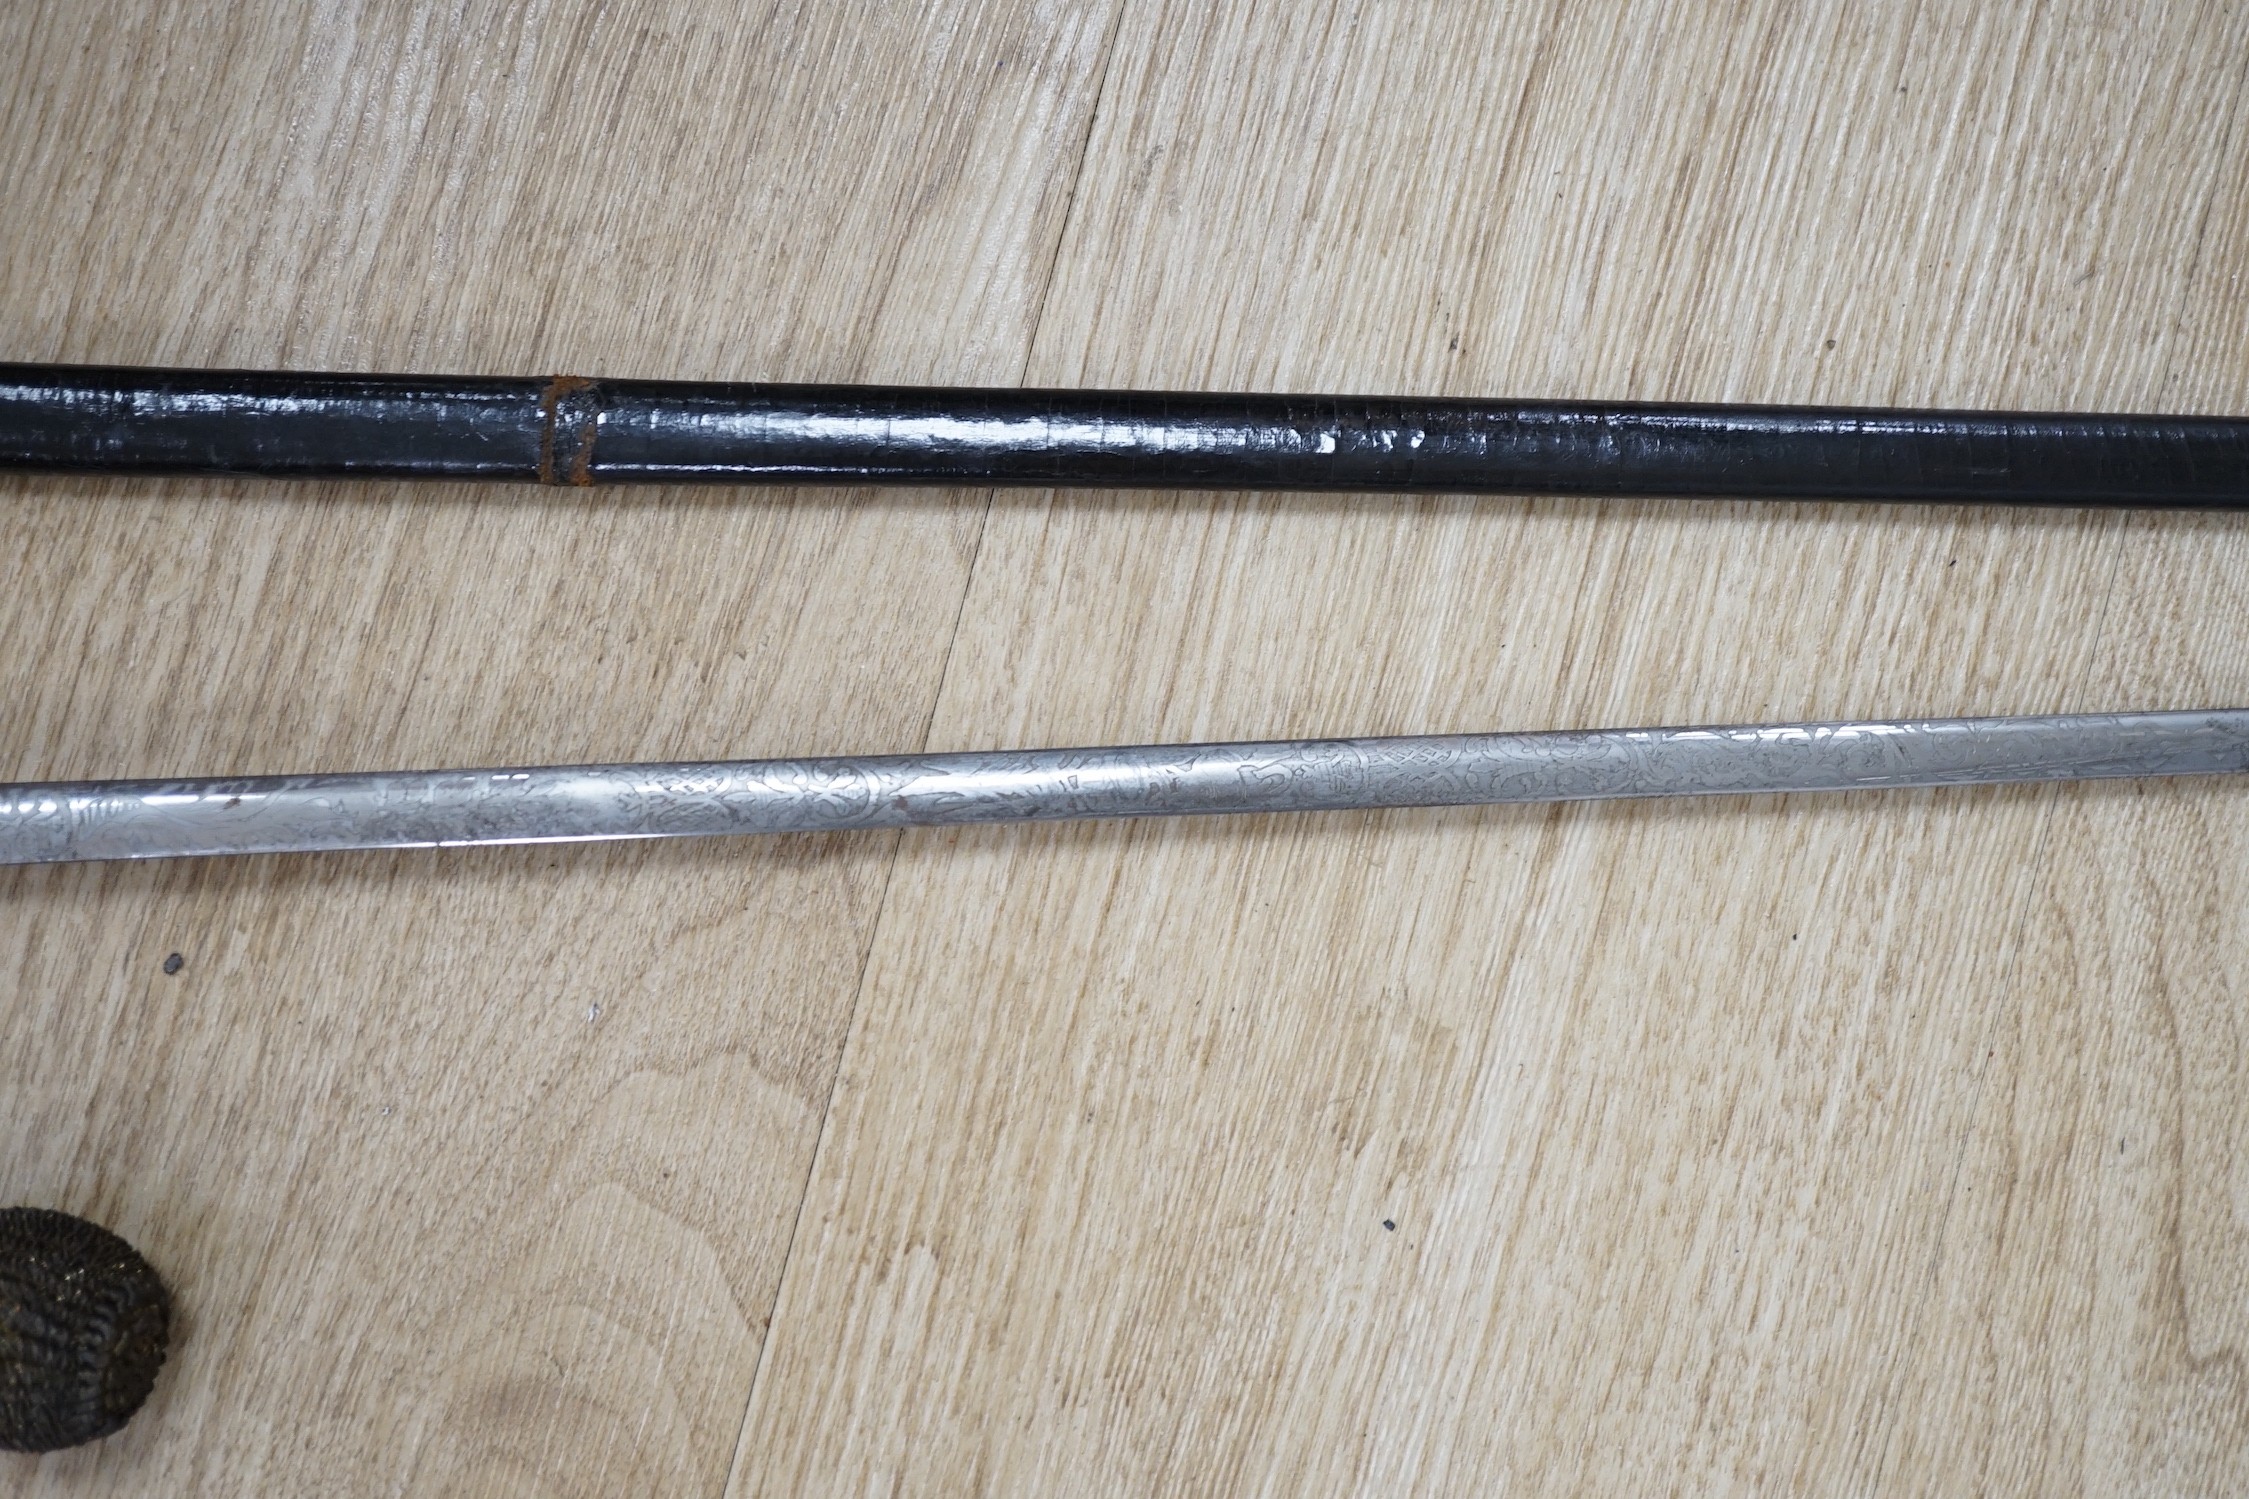 A 19th century officer's dress sword, made by Silver &Co. London with scabbard and leather cover - Image 3 of 5